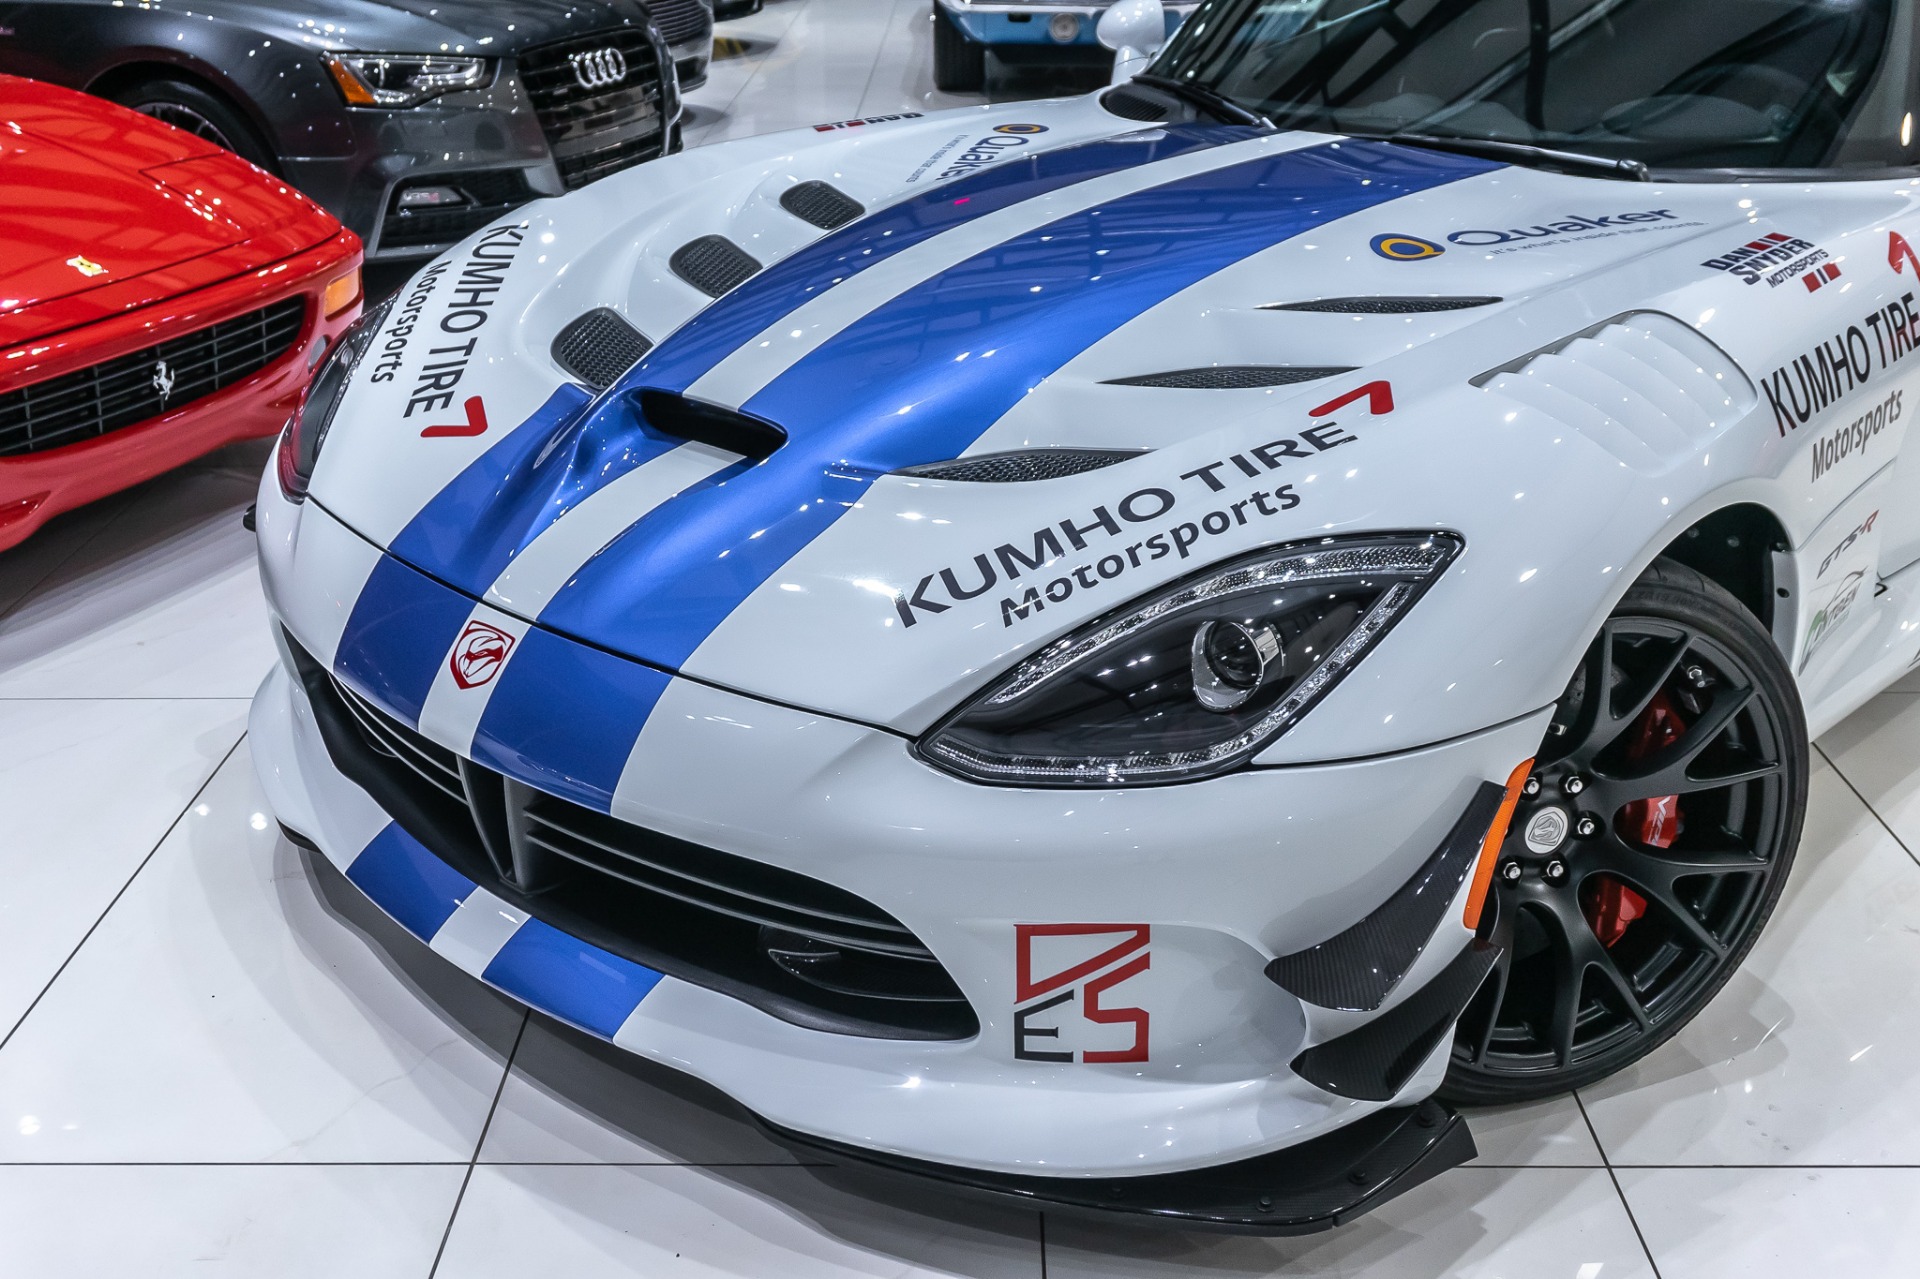 Used-2017-Dodge-Viper-ACR-GTS-R-Nurburgring-Commemorative-Edition-1-of-15